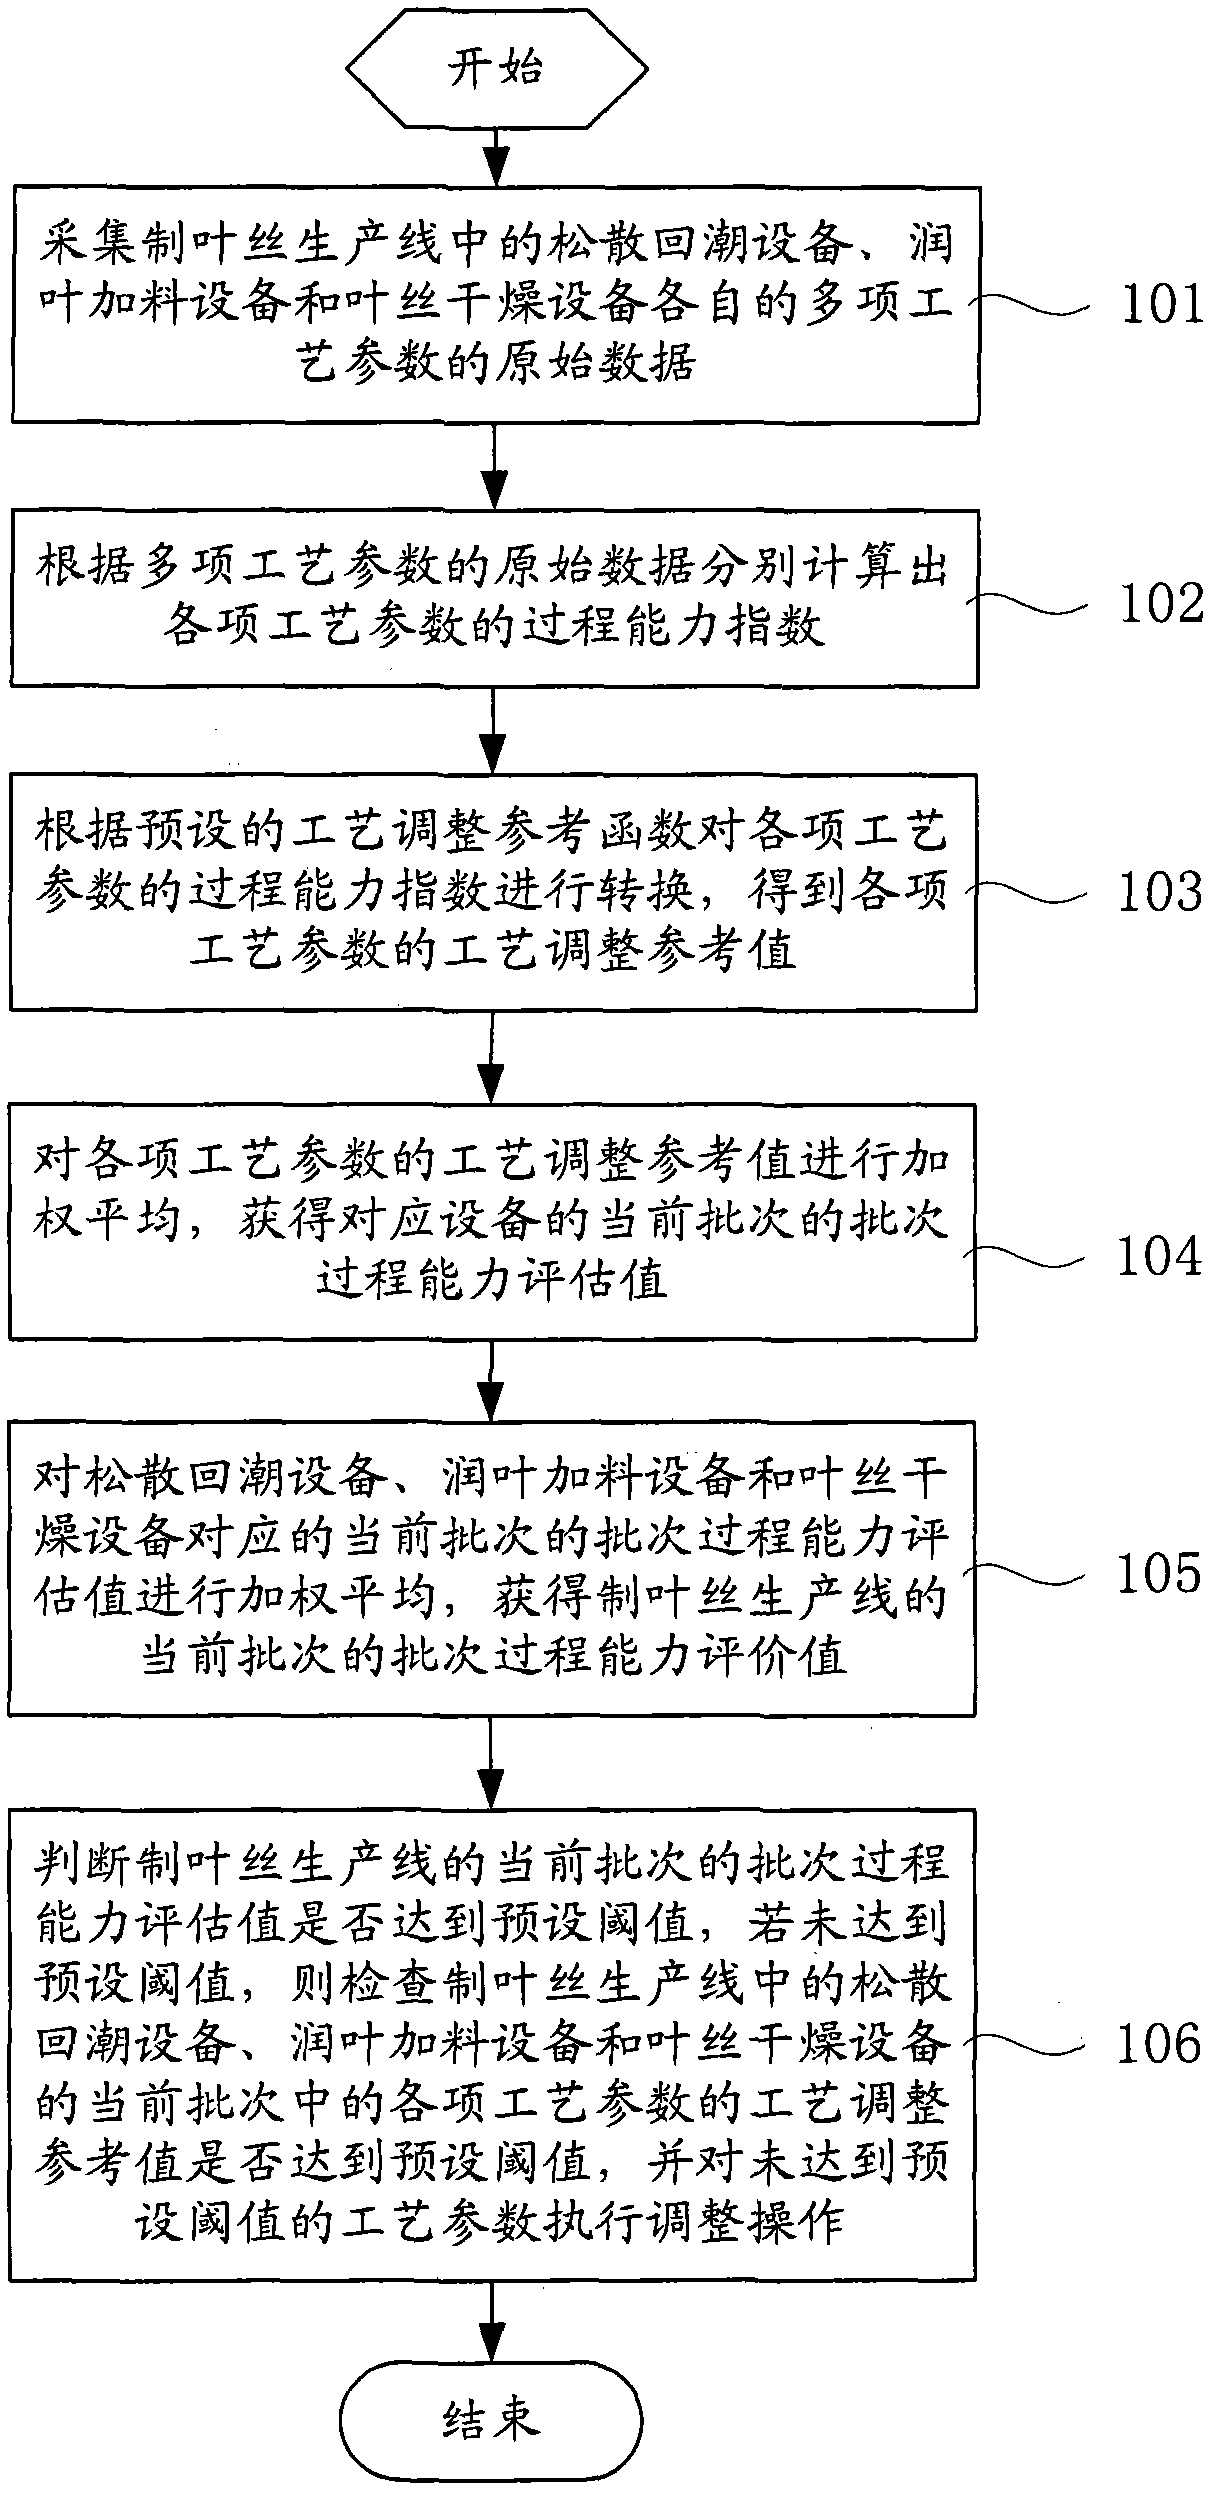 Method for improving batch procedure capability of tobacco shred making process